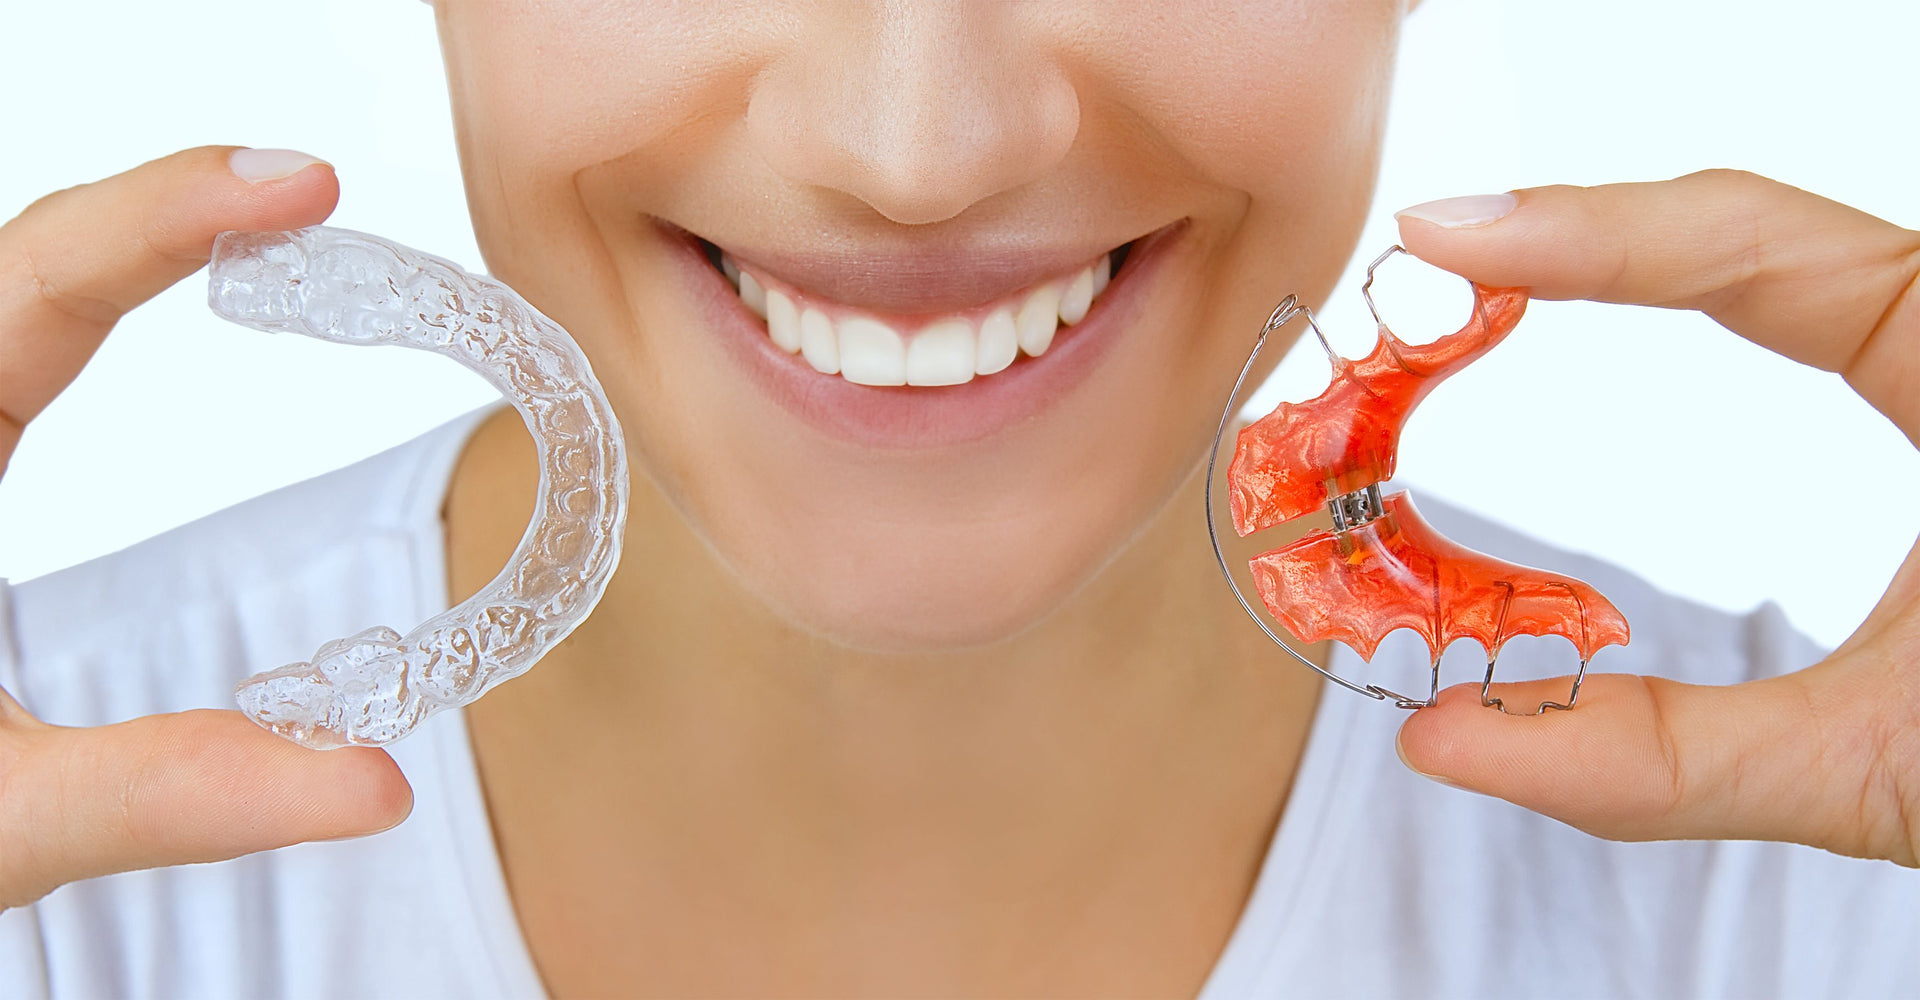 Invisalign® or Clear Braces - Smiles by German Design